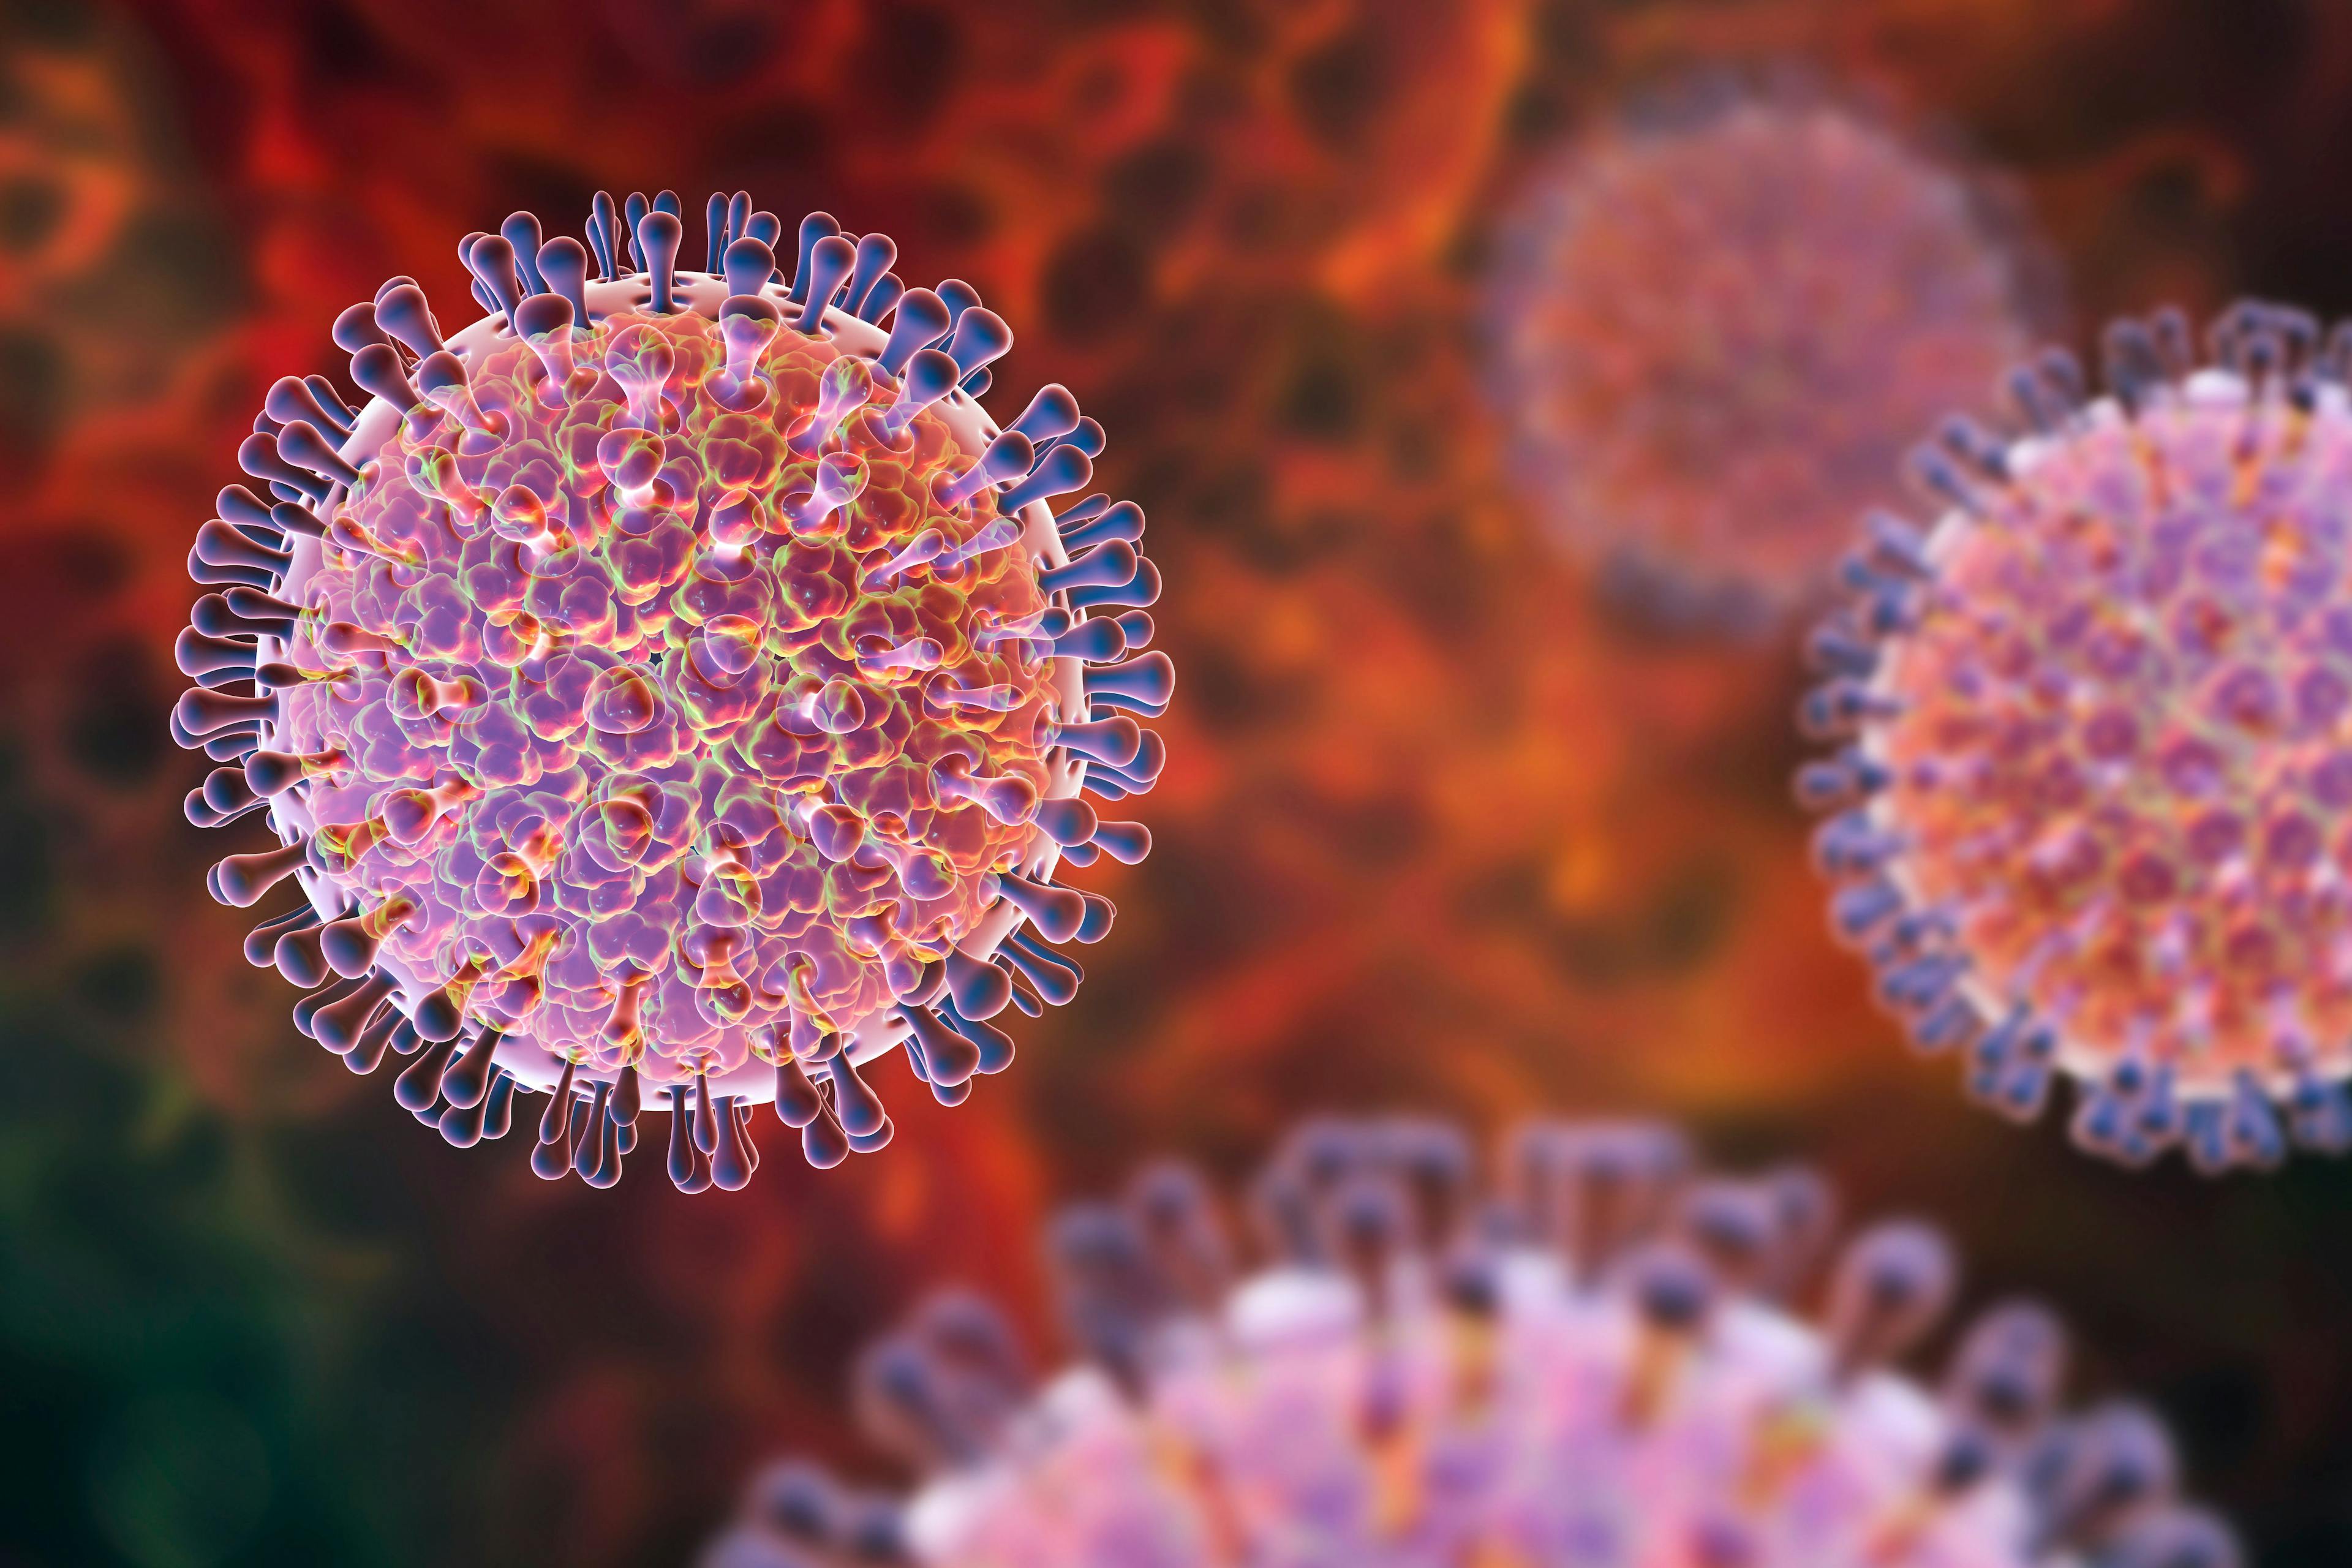 Rotaviruses. Molecular model of a rotavirus which causes diarrheal infection in children. 3D illustration | Image Credit: © Dr_Microbe - stock.adobe.com